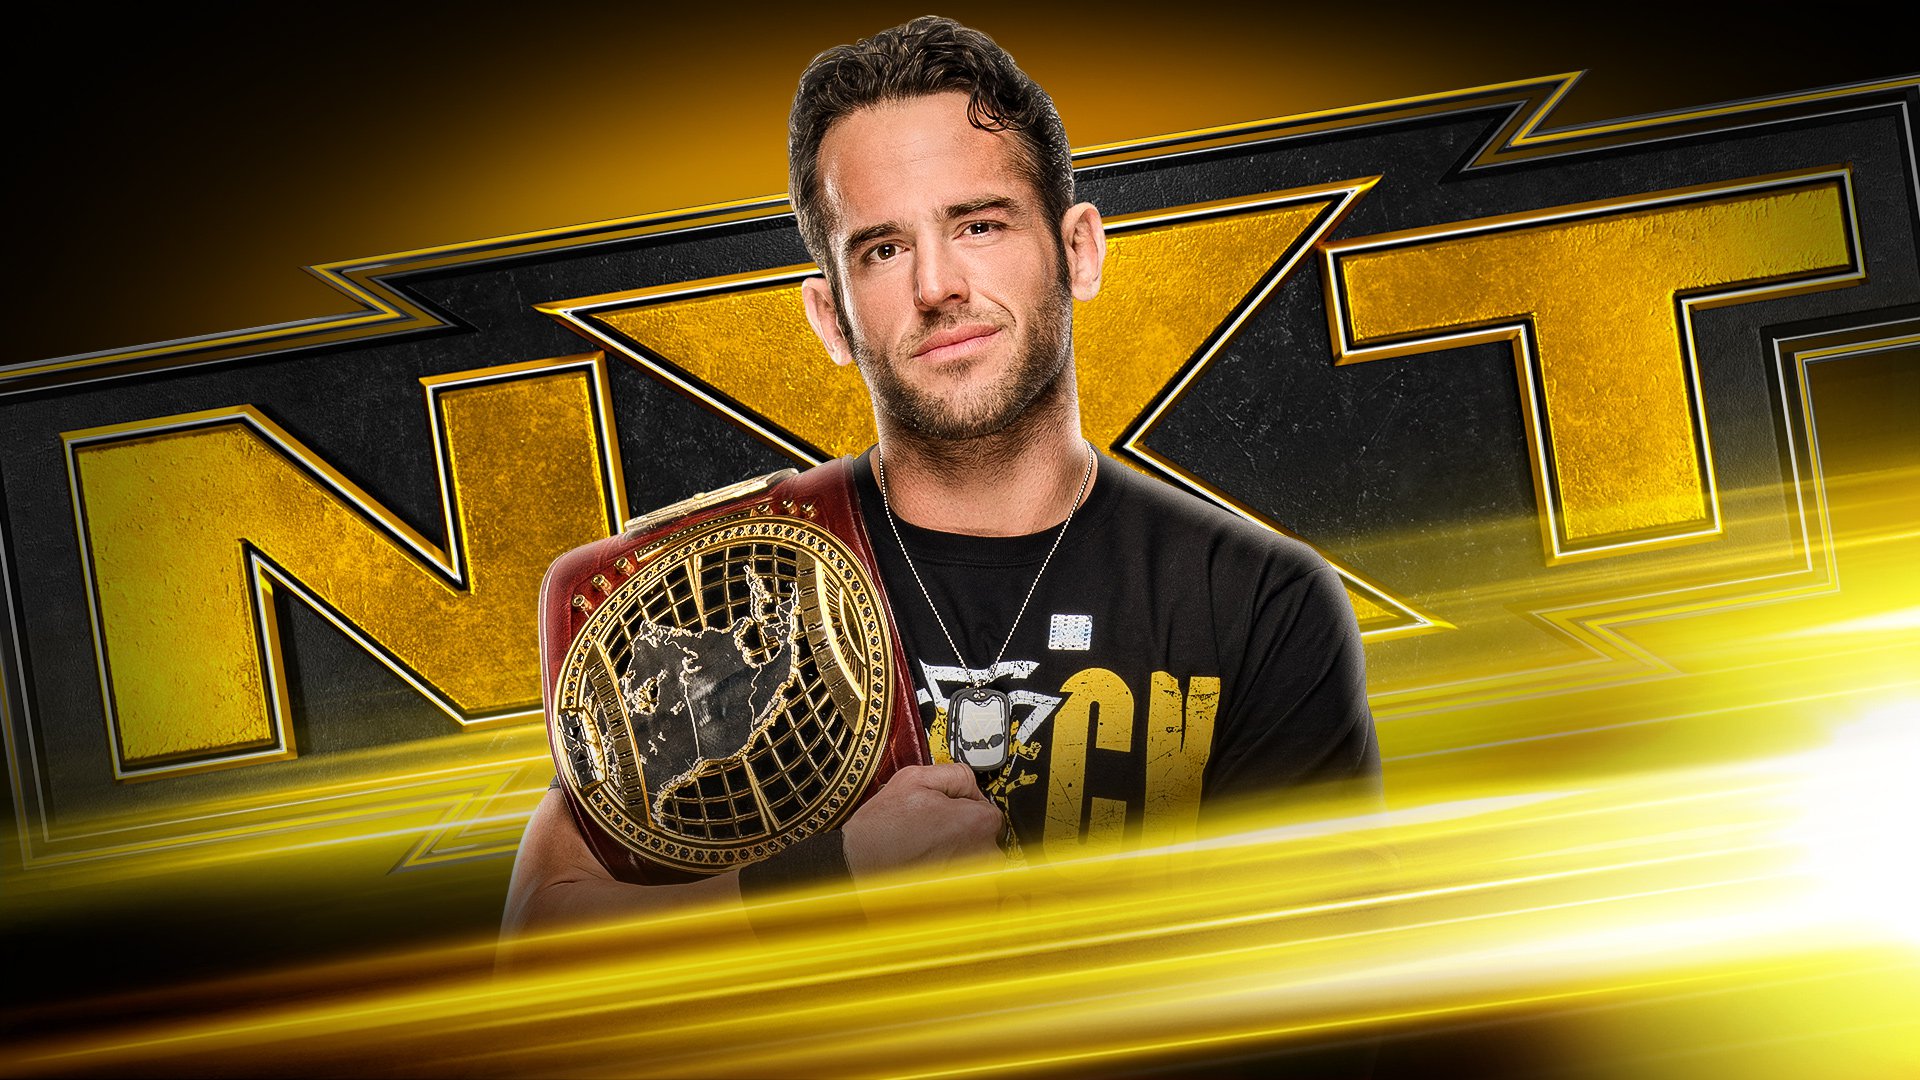 Roderick Strong defends the NXT North American Championship on